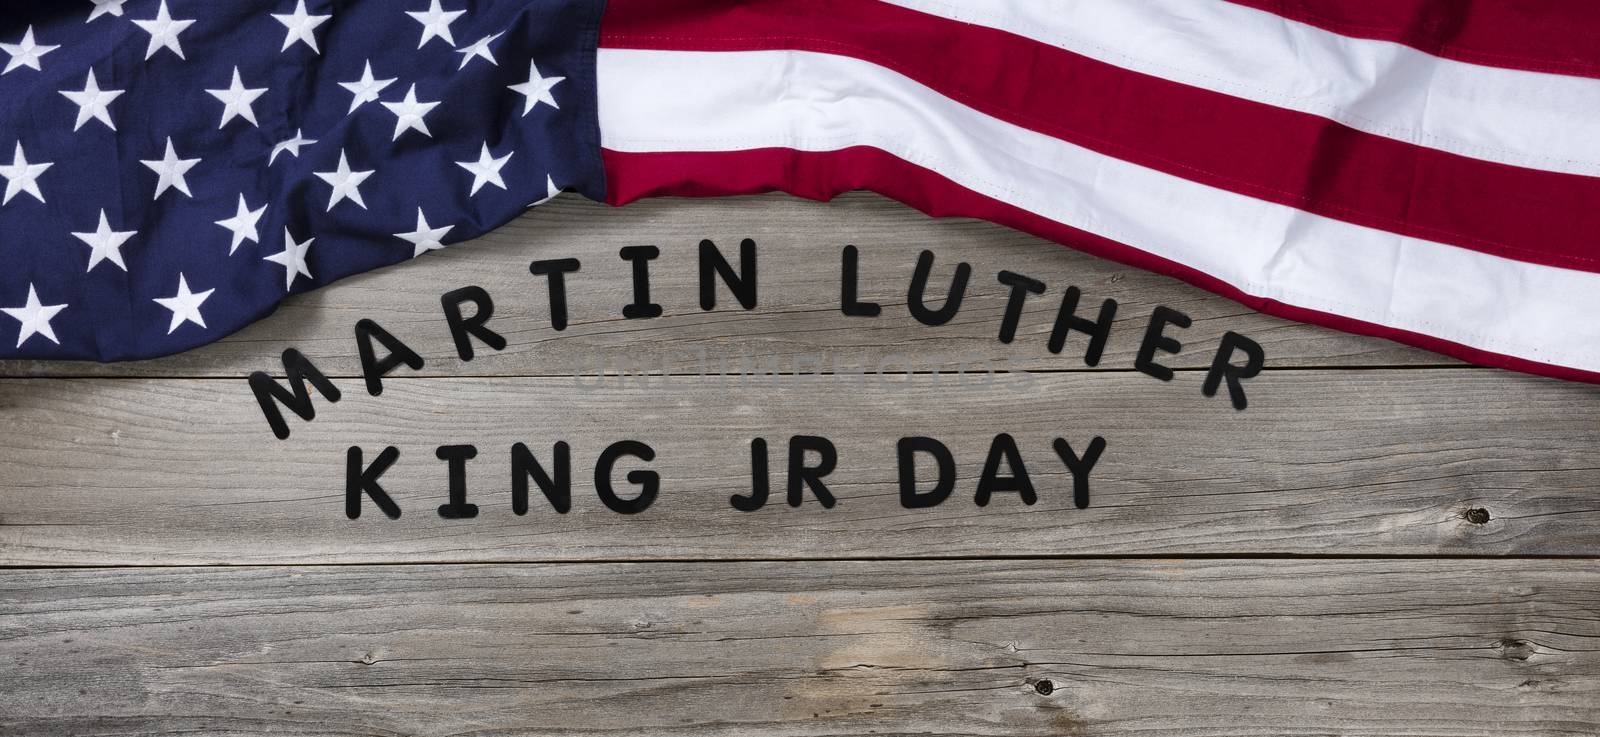 Martin Luther King Day background for freedom concept  by tab1962